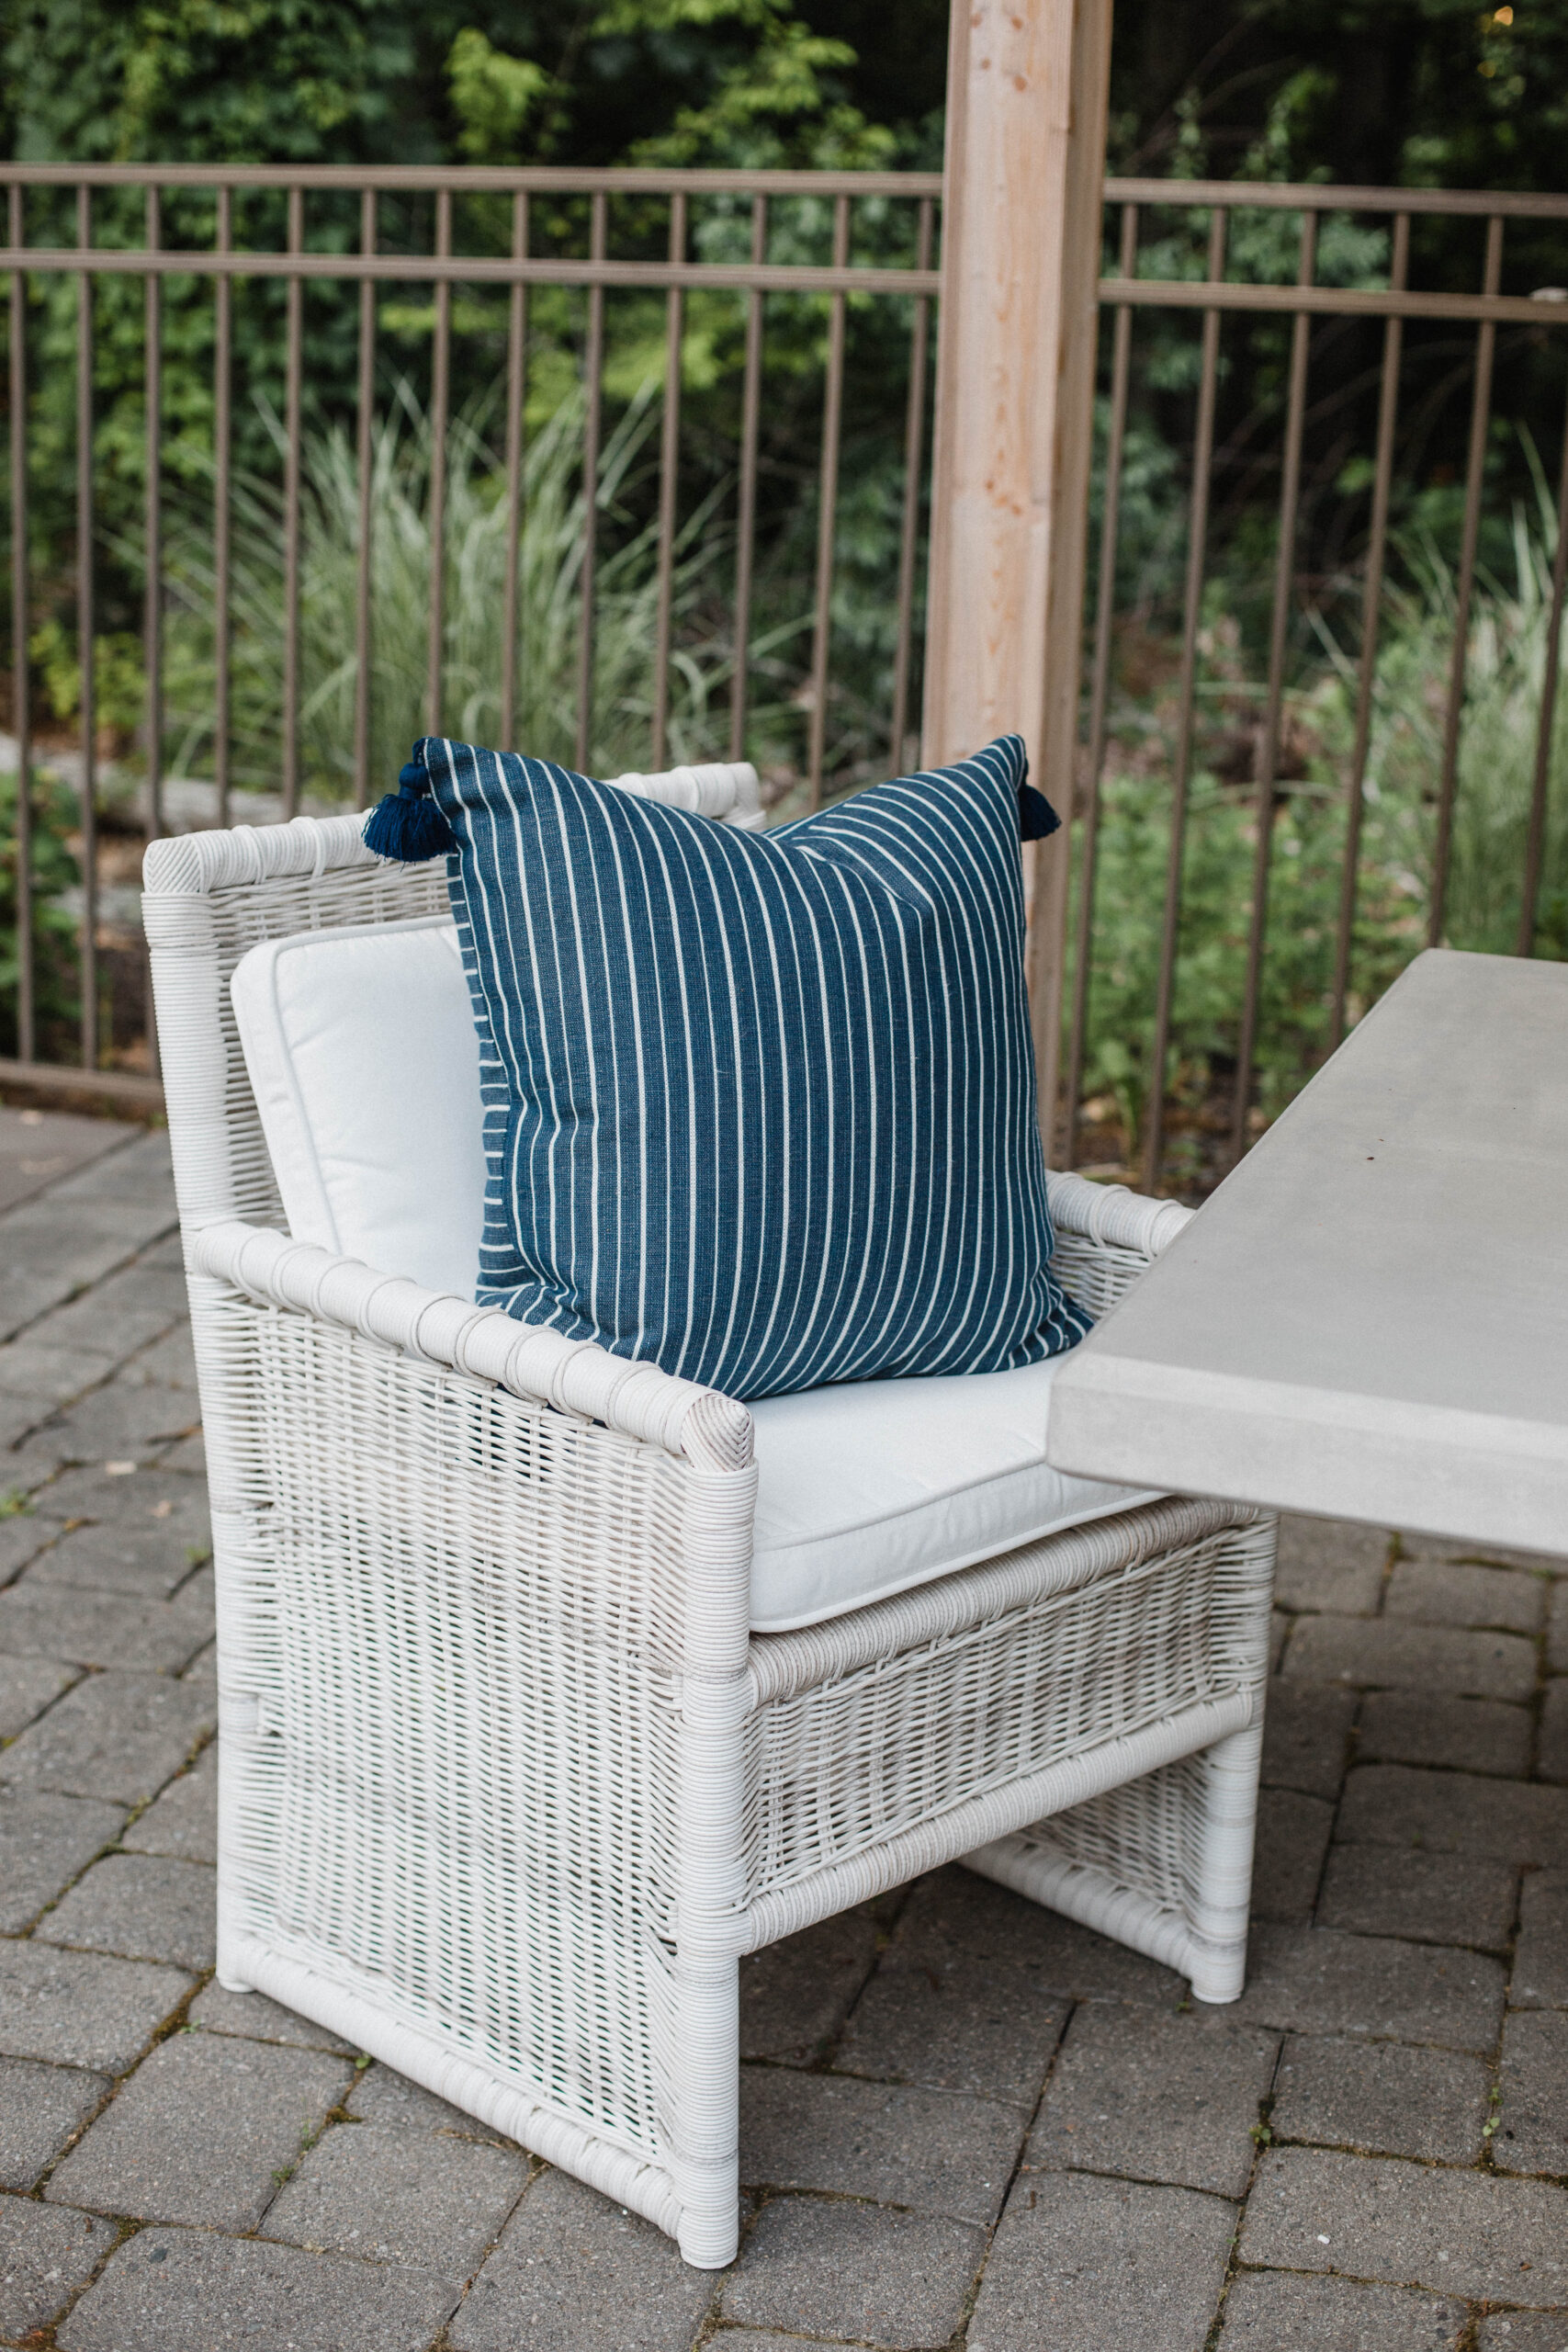 Connecticut life and style blogger Lauren McBride shares her experience and review of Sunbrella fabric for outdoor furniture.